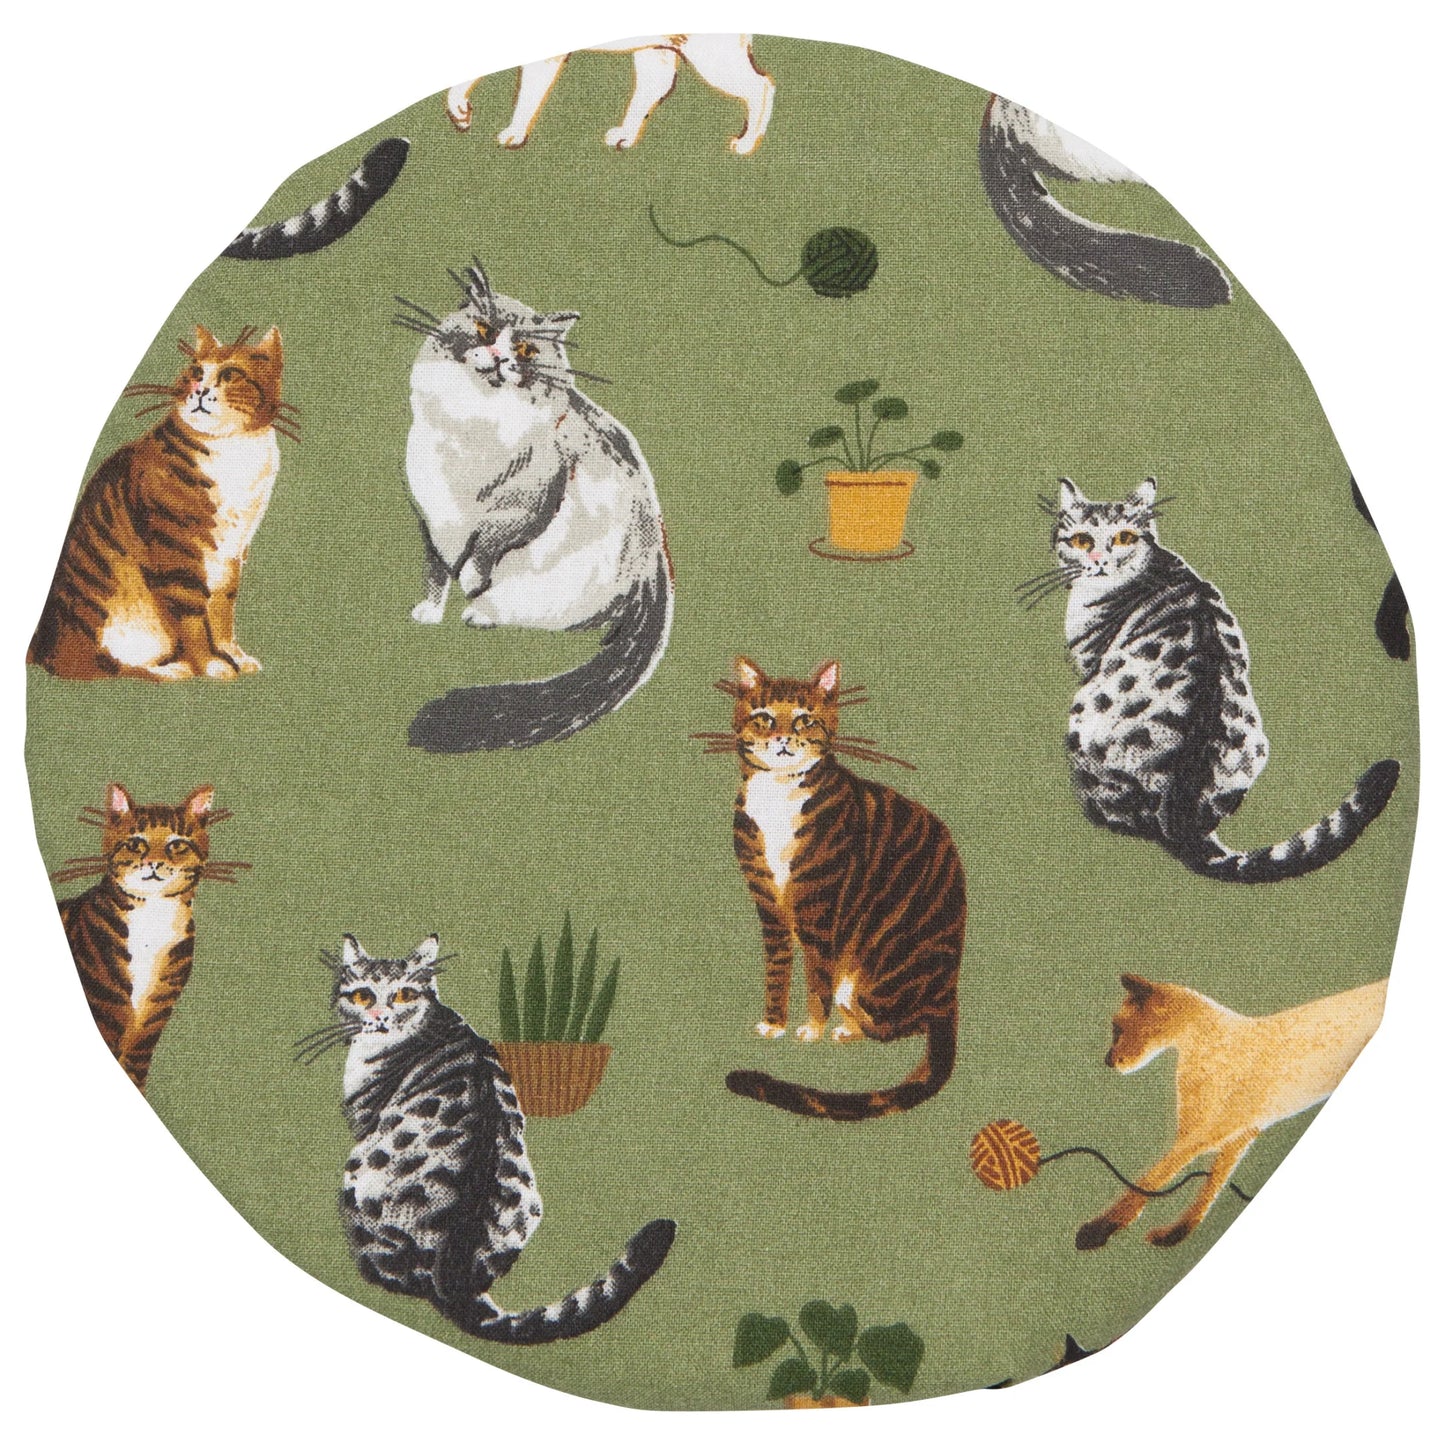 Cat Collective Bowl Covers Set of 2